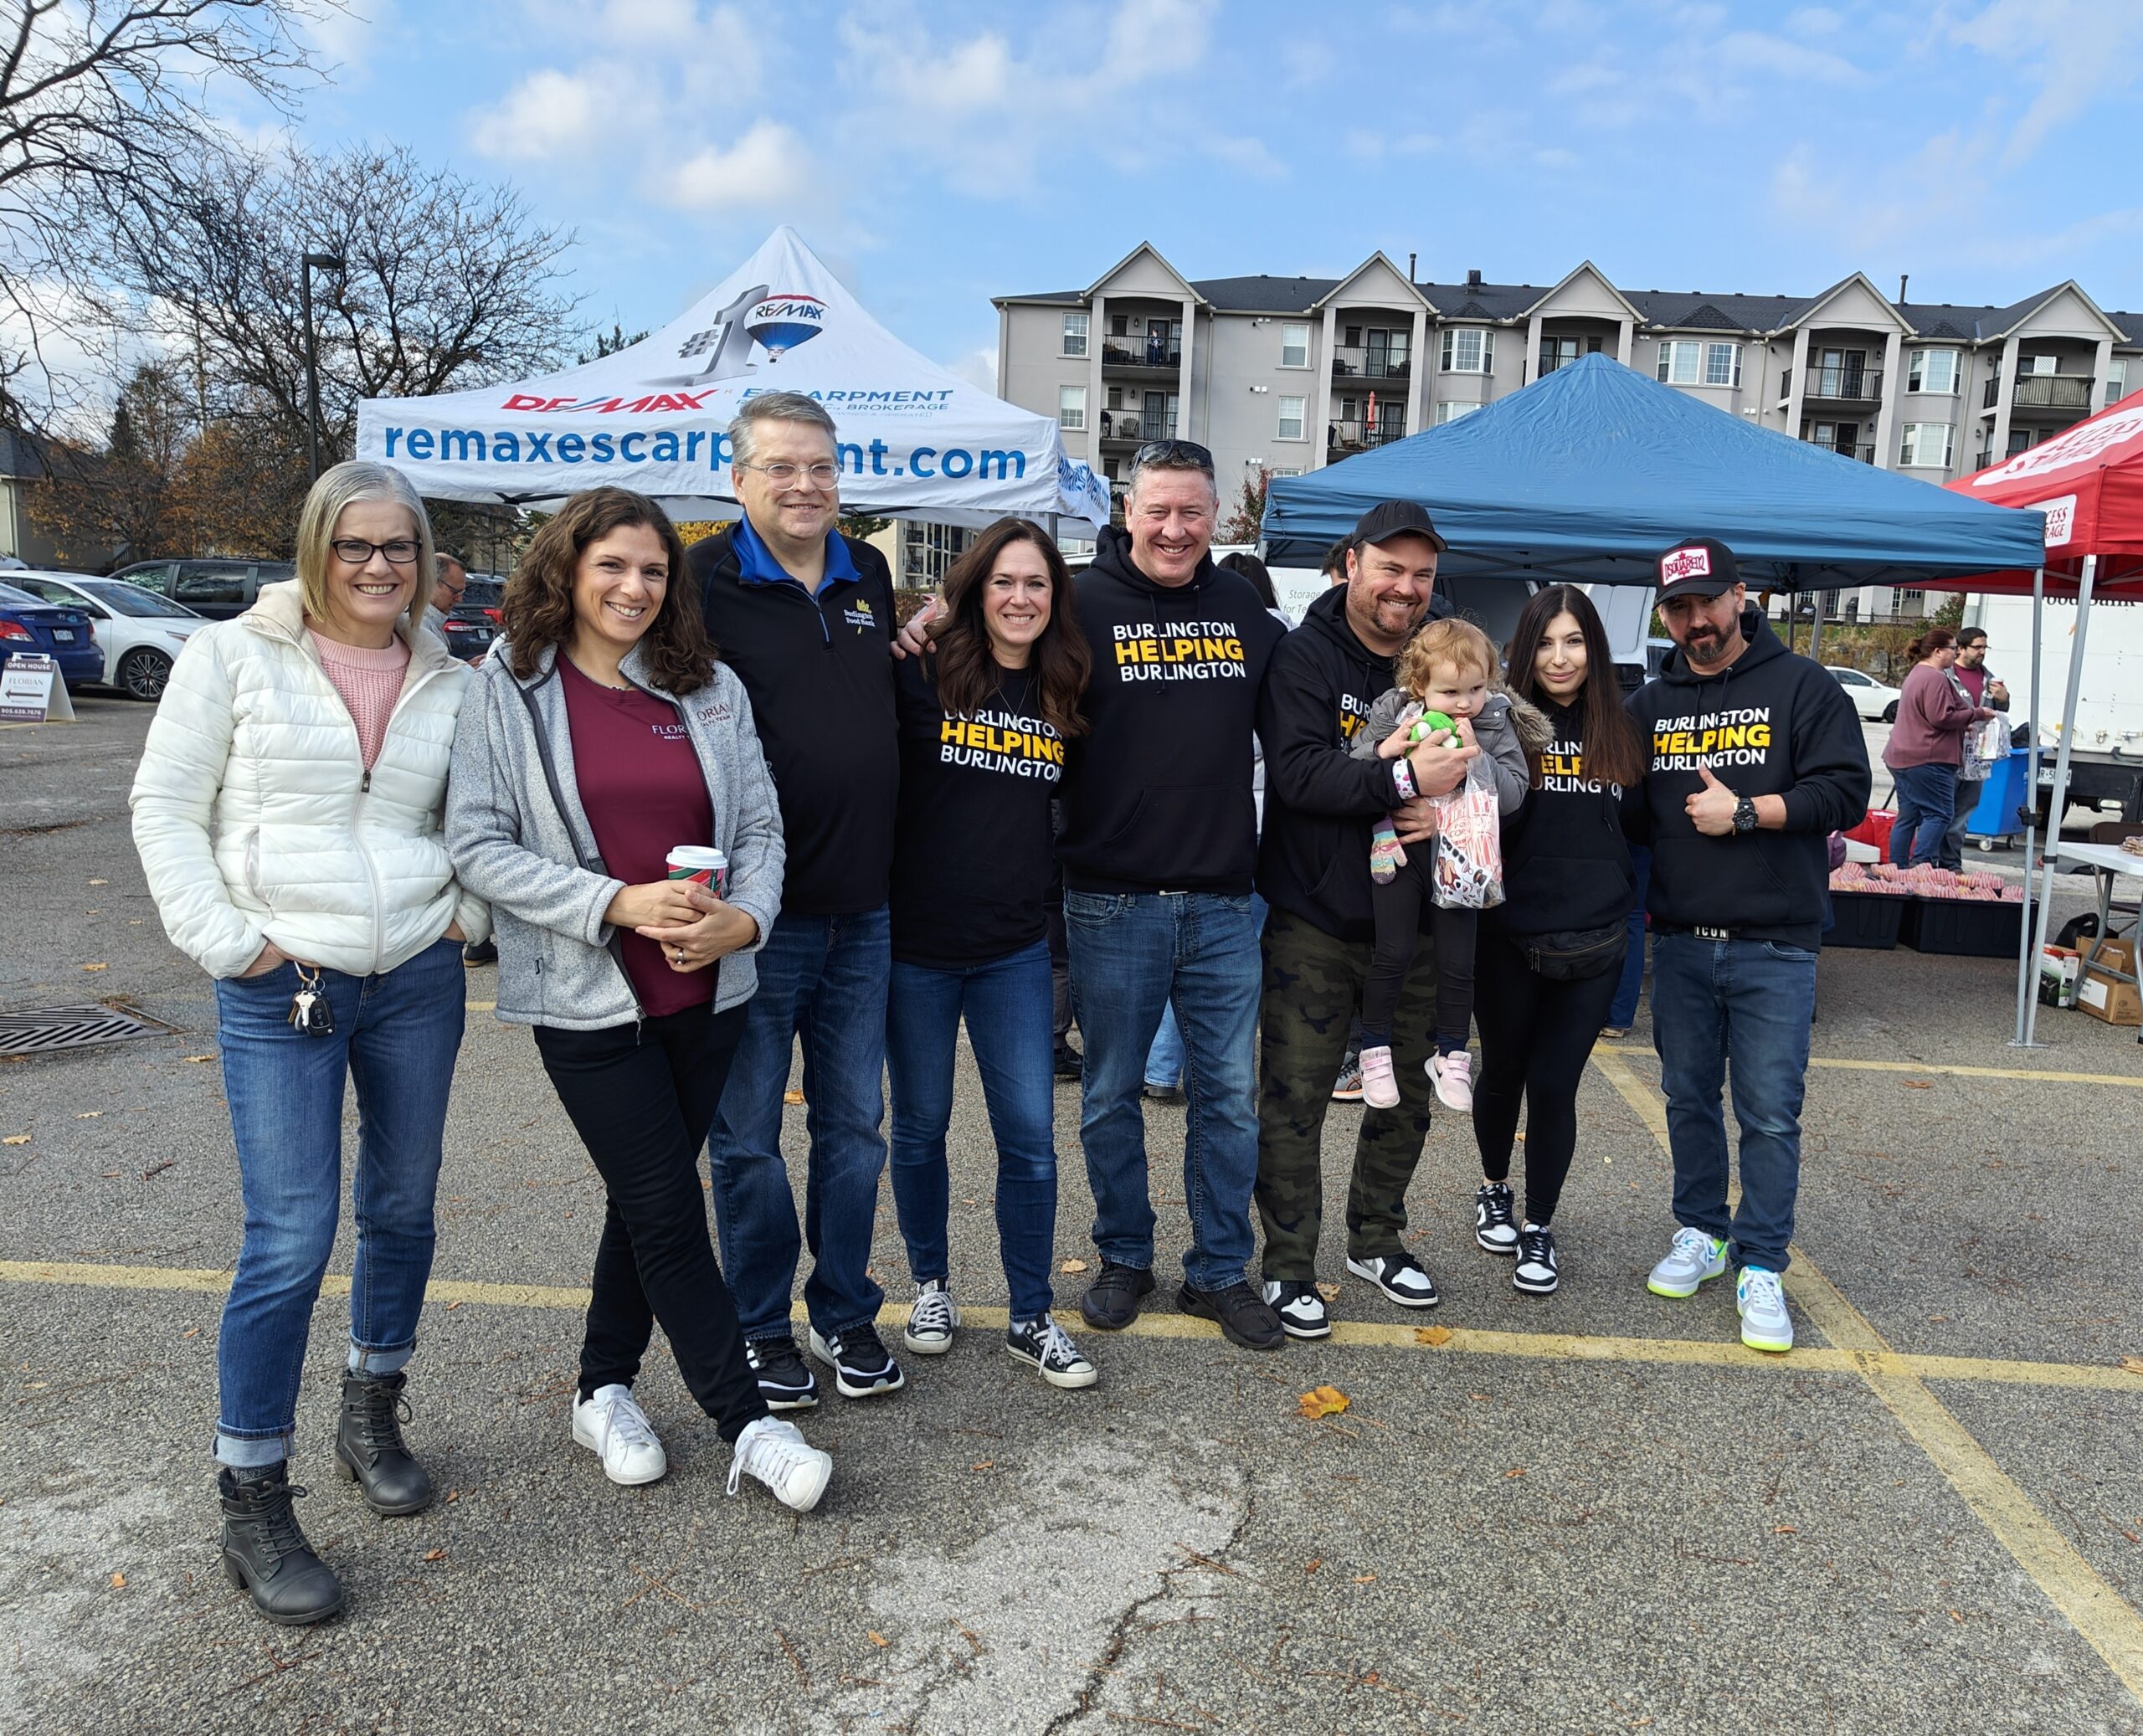 A group of nine people pose in a line at a Burlington Helping Burlington and Florian Realty food drive event.